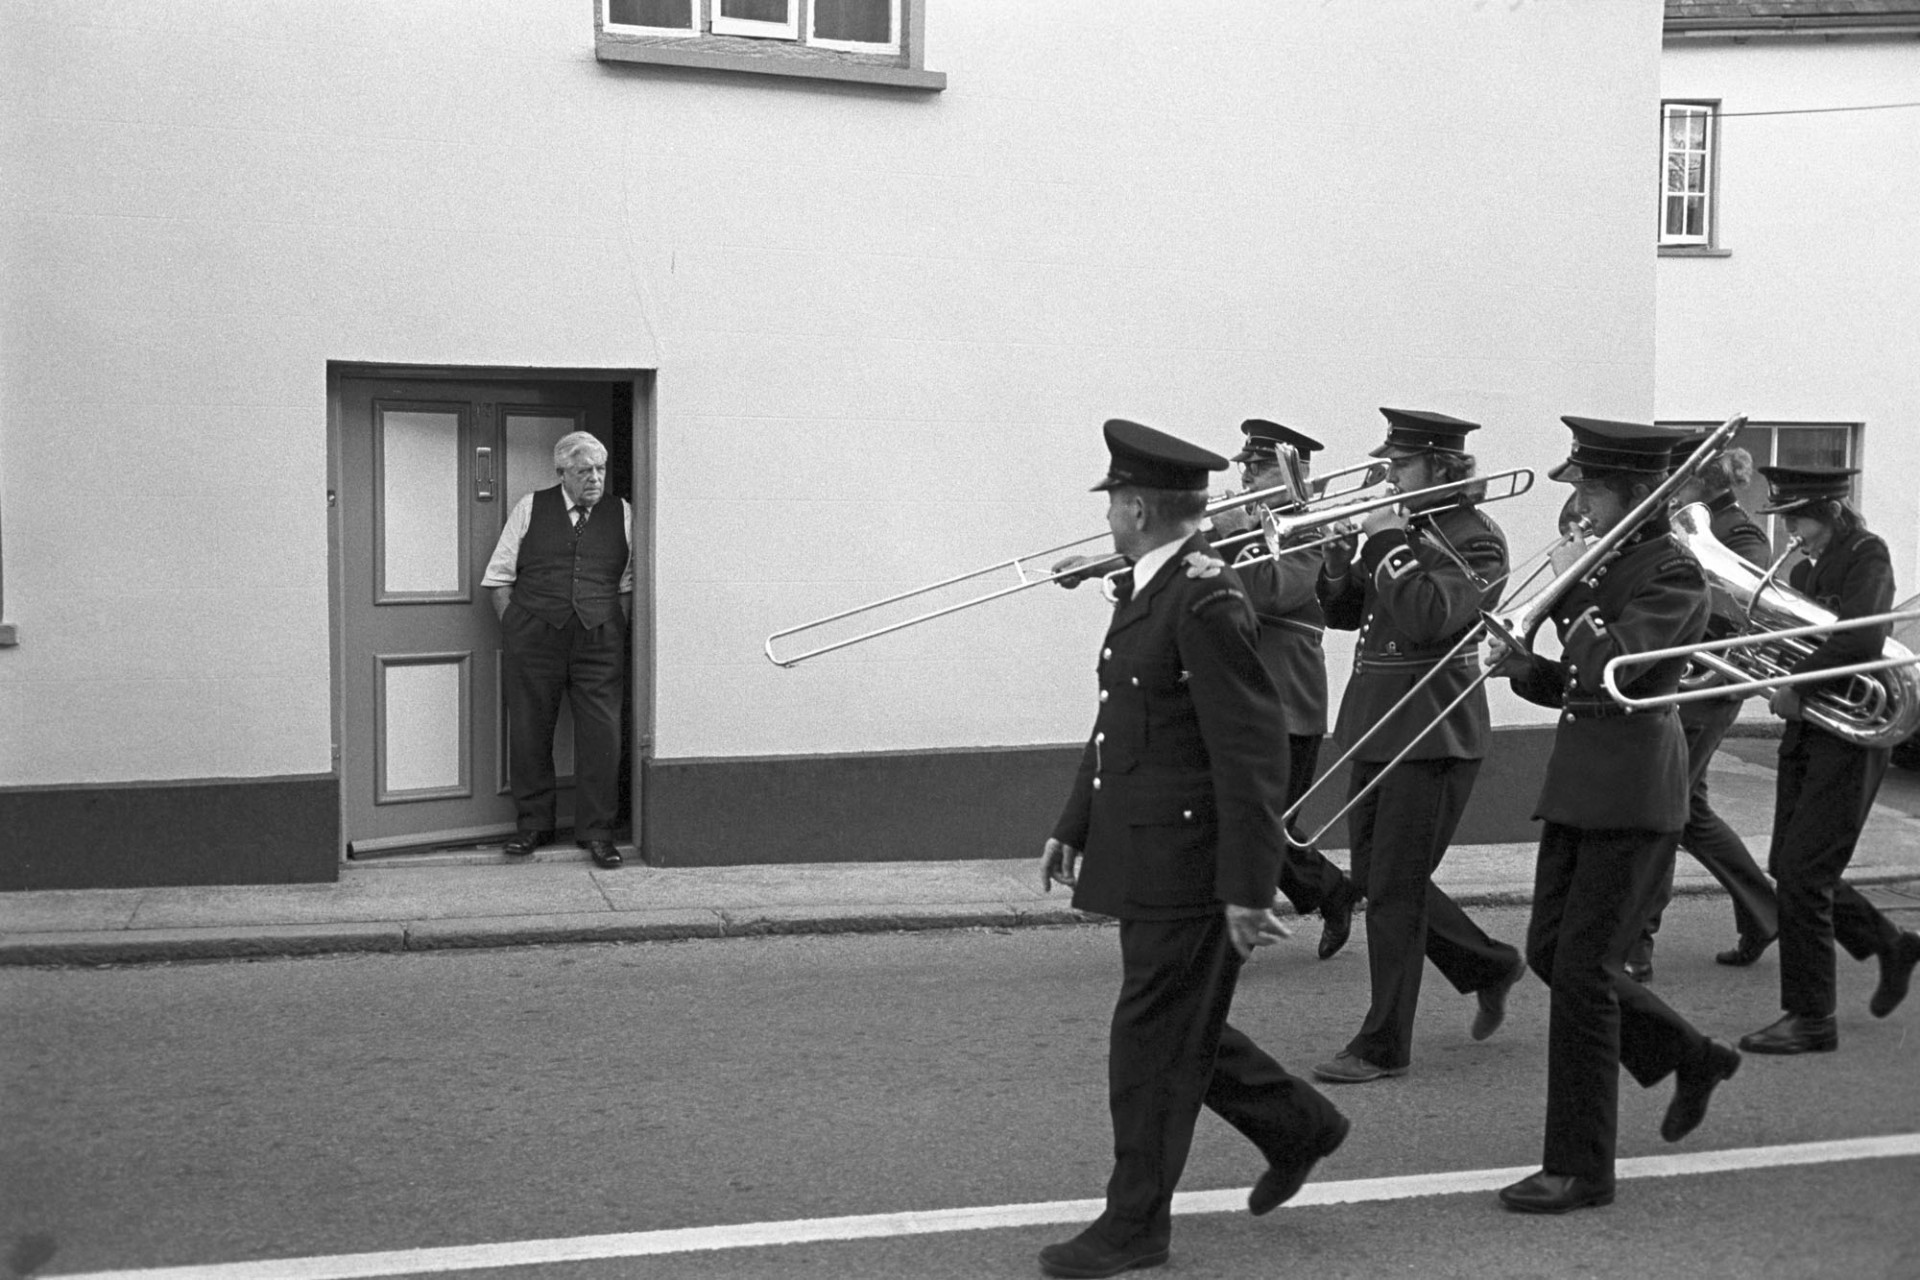 Hatherleigh Silver Band leading British & Foreign Bible Society Parade.
[A man is watching Hatherleigh Silver Band parade past from his front door at Hatherleigh in the British & Foreign Bible Soicety Parade.]